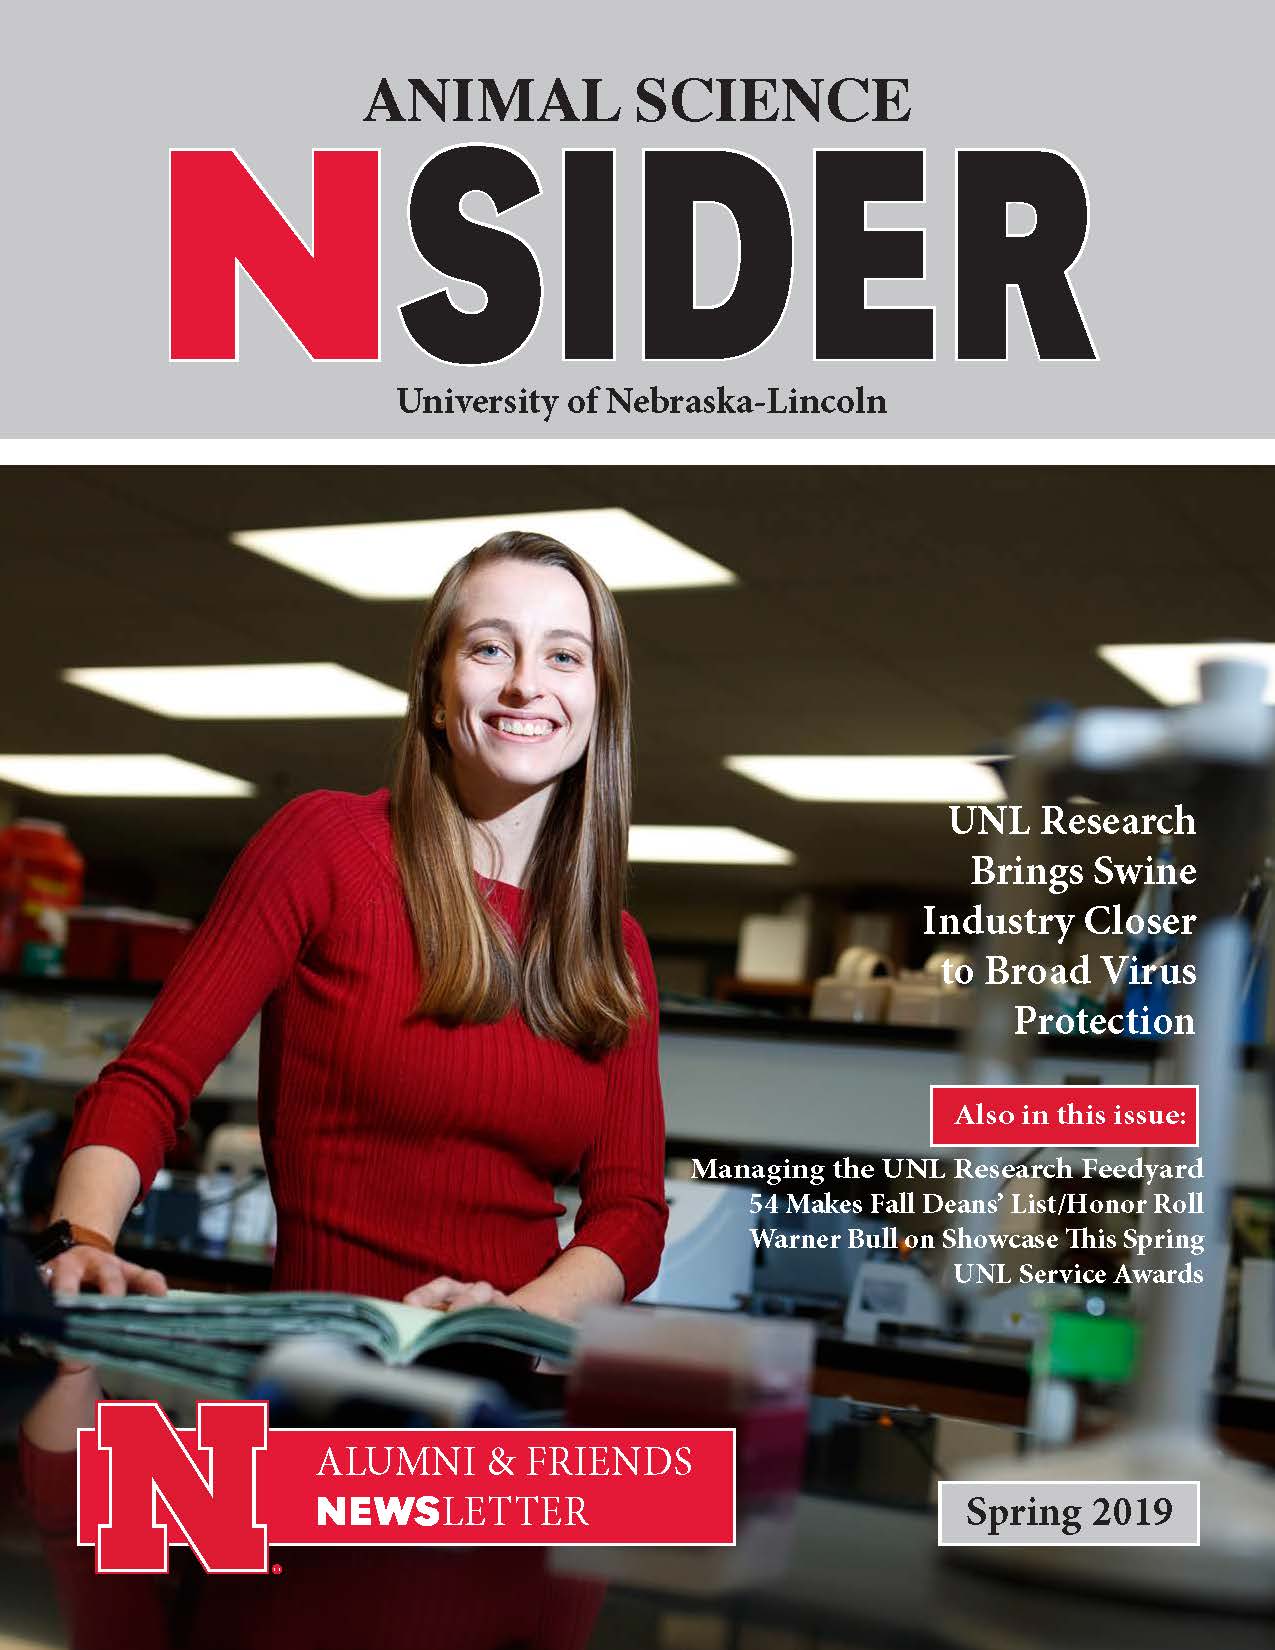 Cover page featuring Lianna Walker